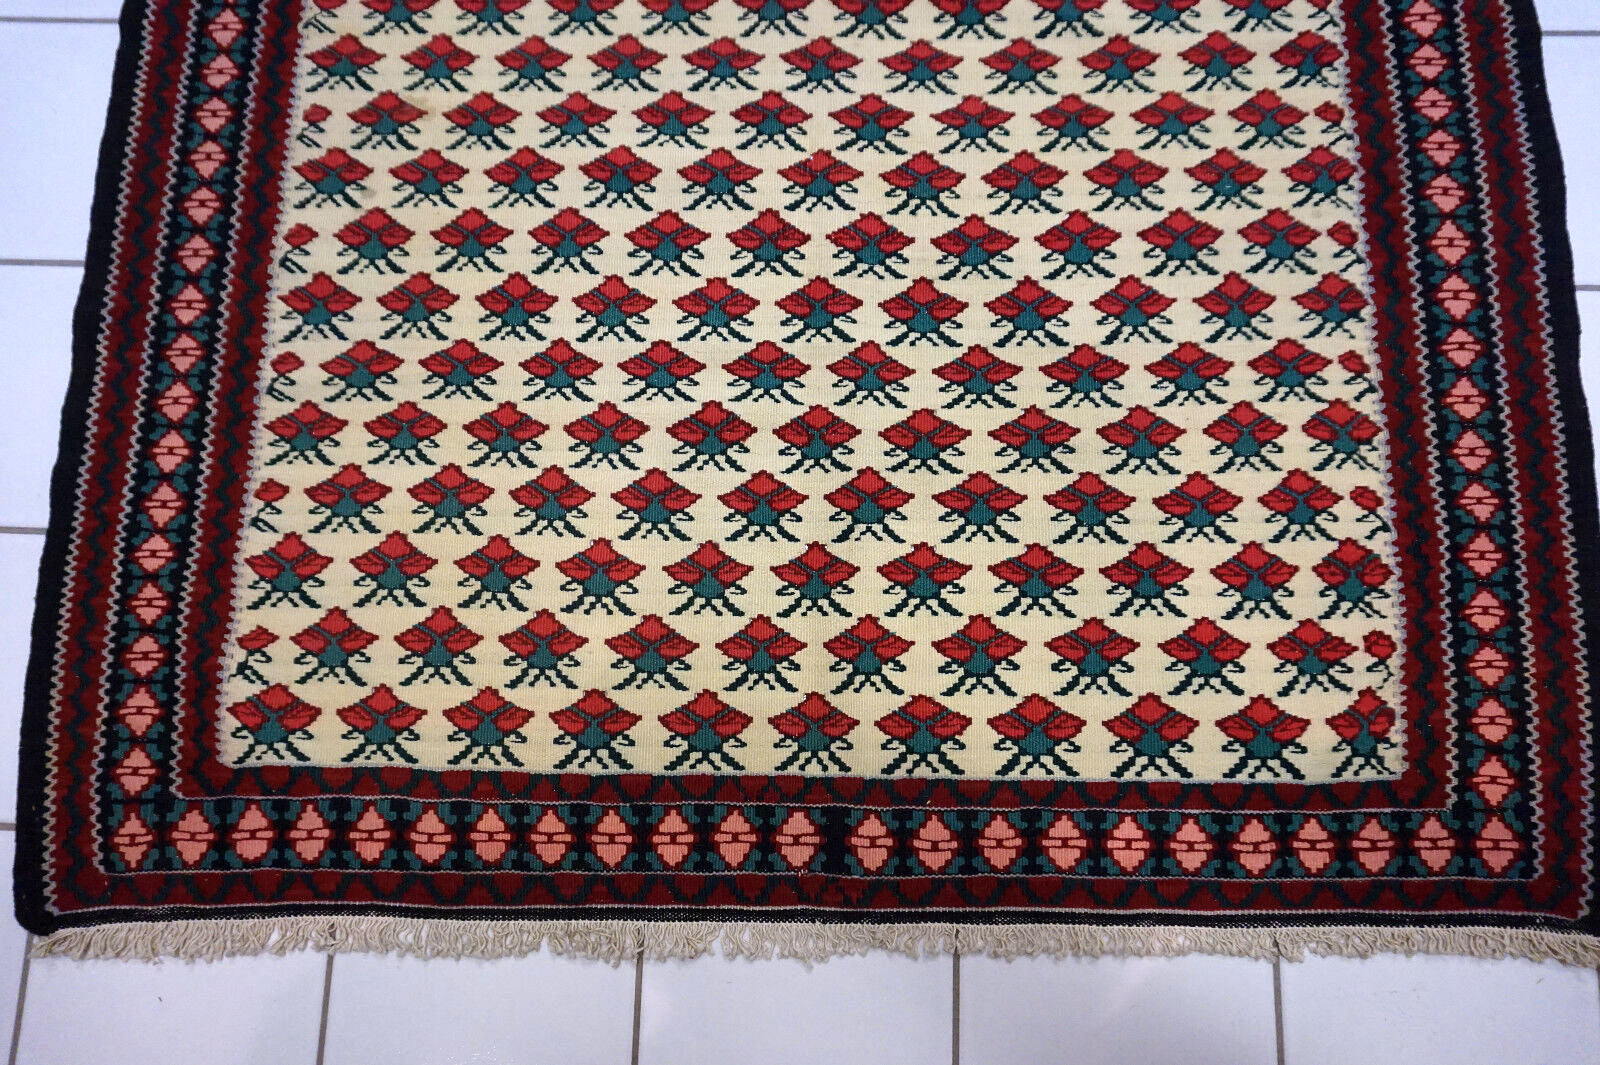 Antique wool rug with unique handmade craftsmanship from the Middle East